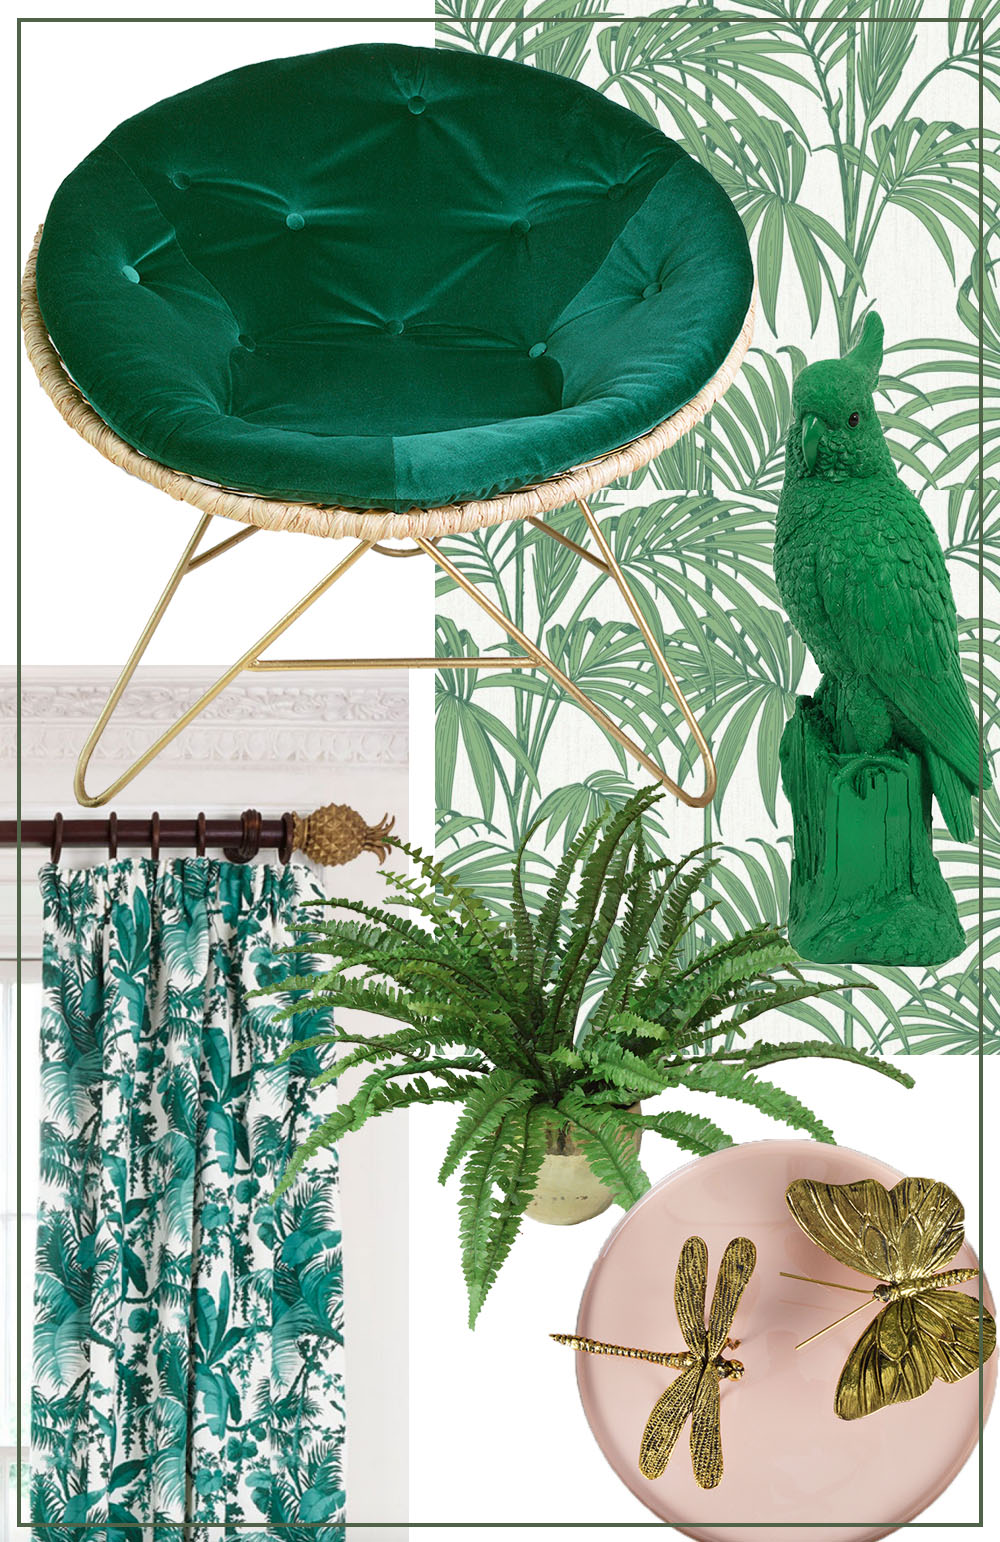 Tropical interiors is a key look for SS16. Think lush tropical greenery with colonial rattan- Audenza